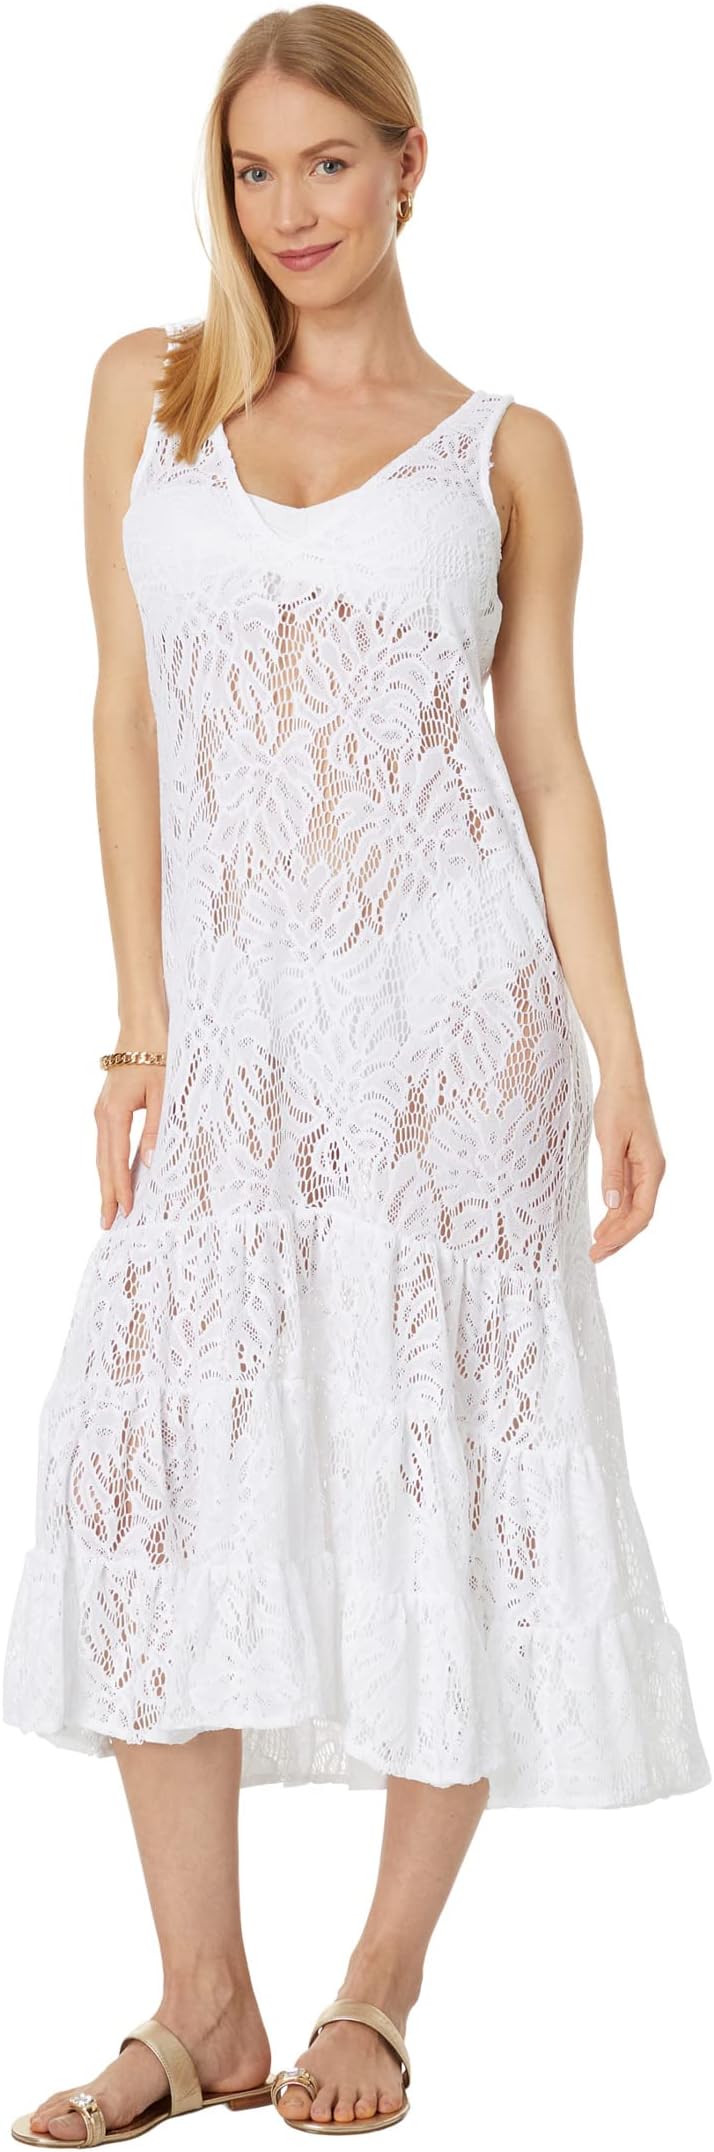 Накидка Finnley Lace Cover-Up Lilly Pulitzer, цвет Resort White Paradise Found Lace paradise island resort